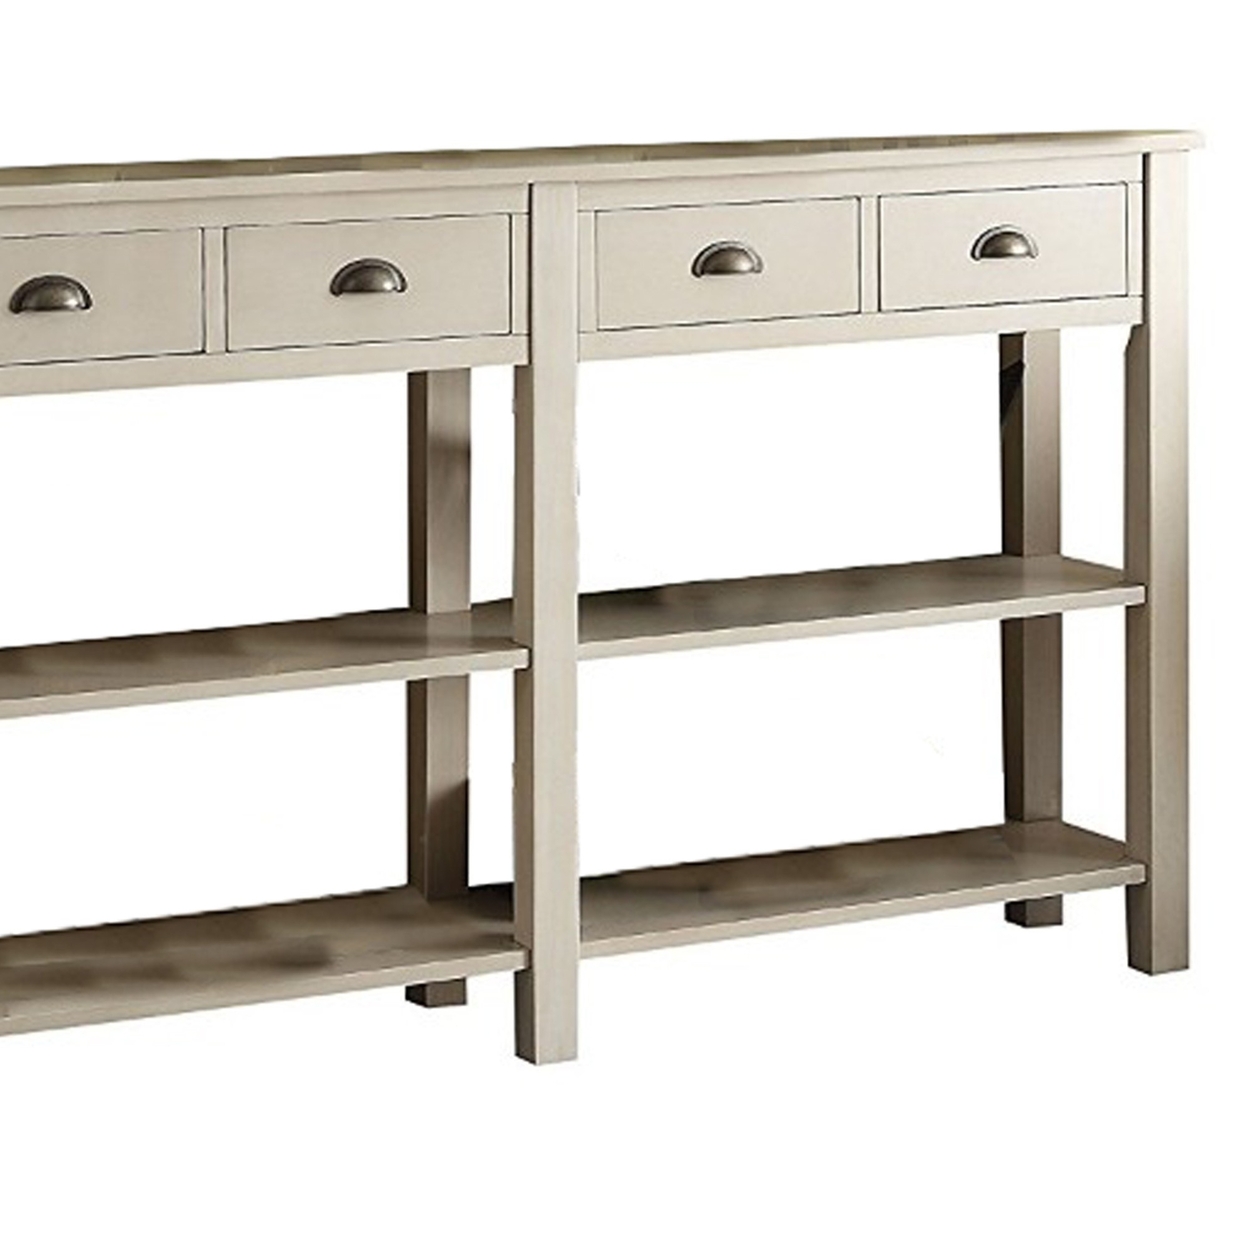 Wooden Console Table With Four Drawers And Two Shelves, Cream- Saltoro Sherpi